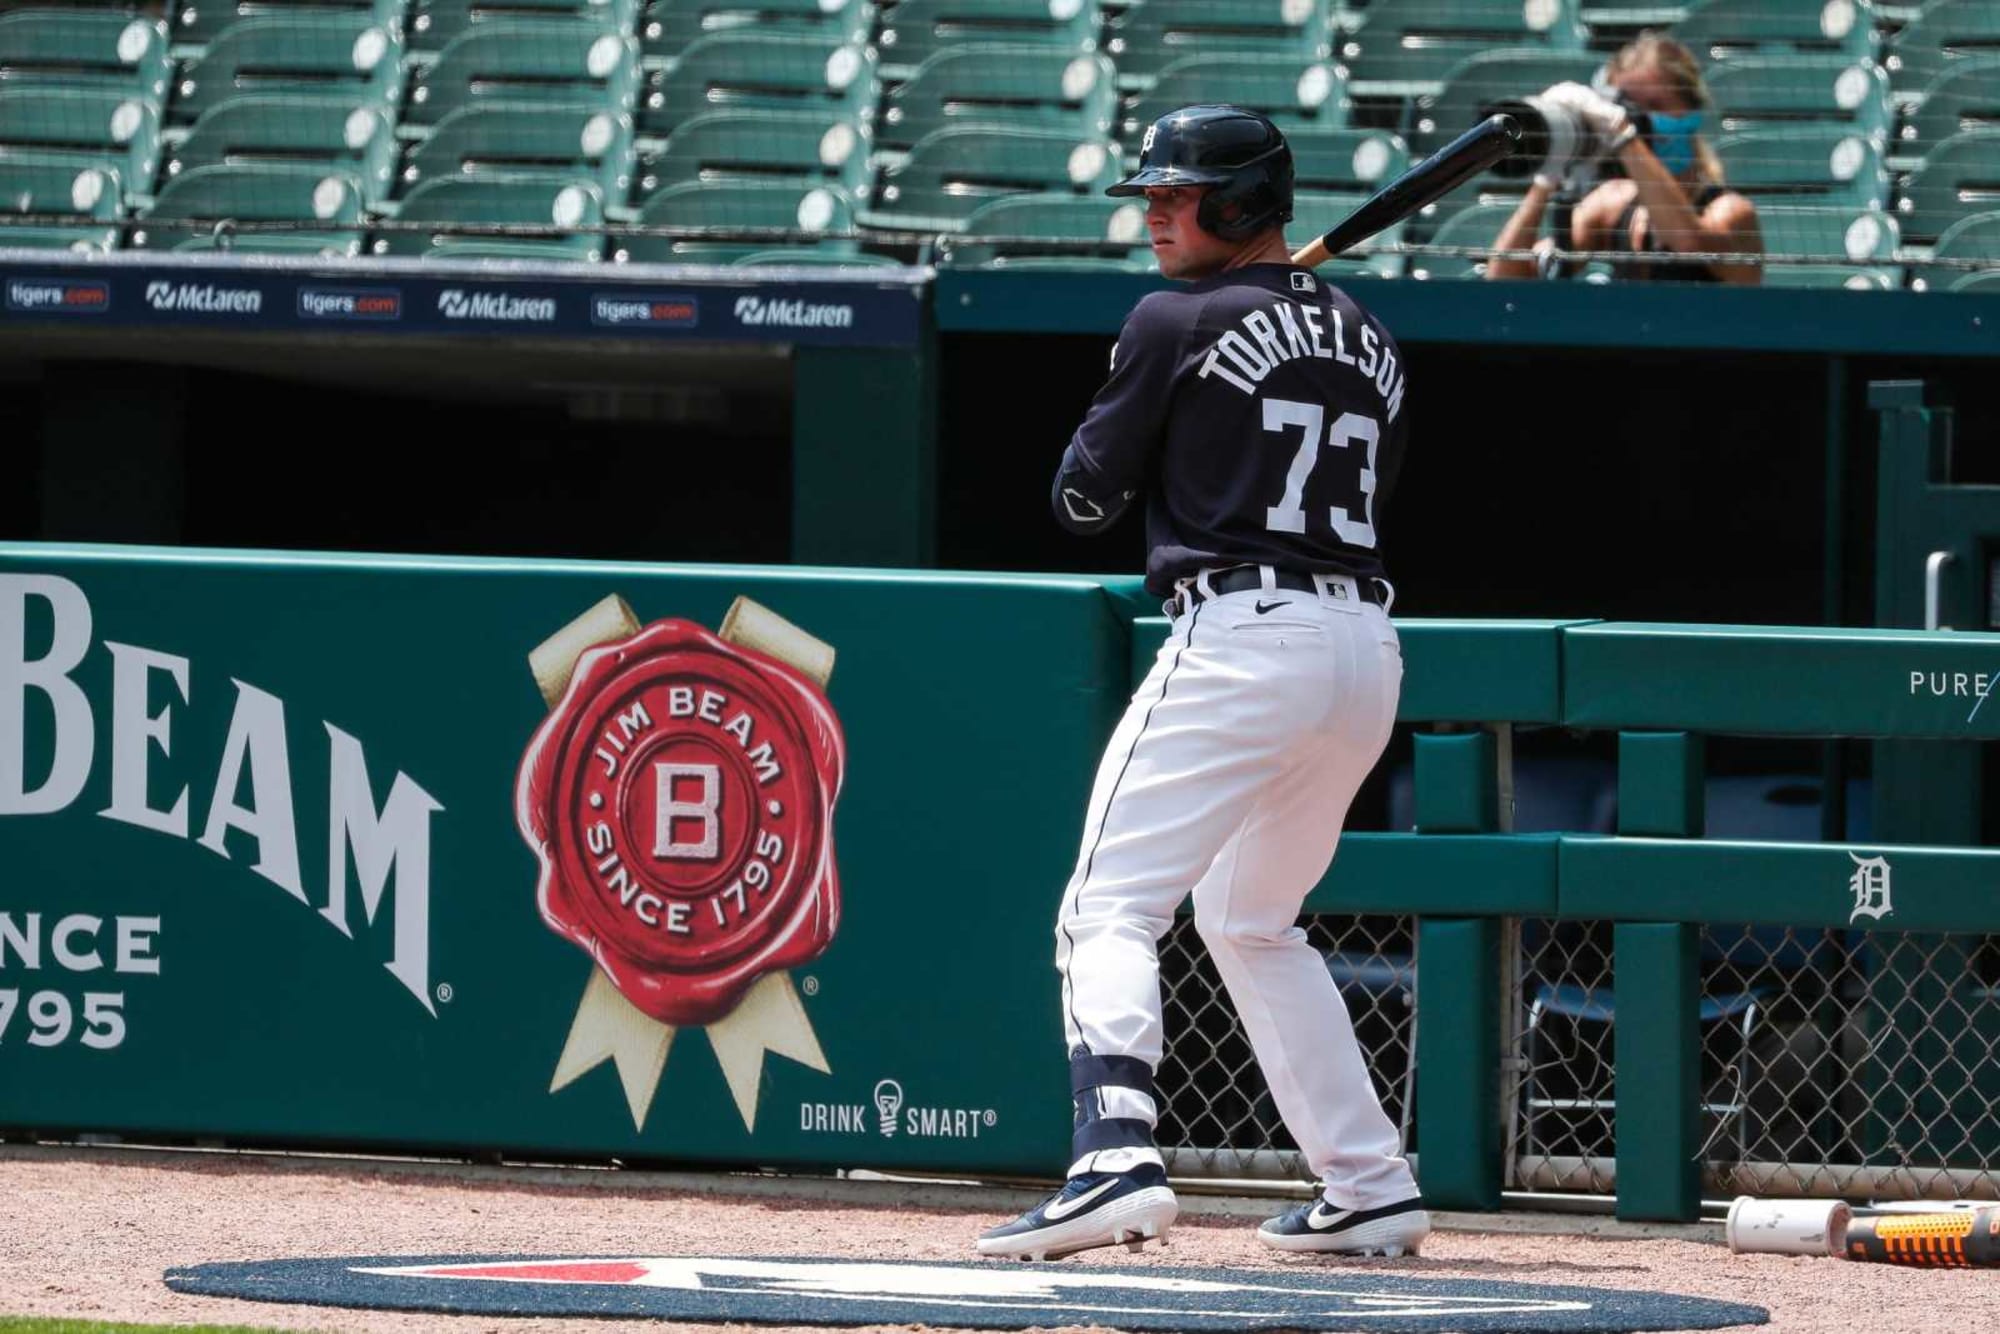 Detroit Tigers: Is Spencer Torkelson a late bloomer to big leagues?